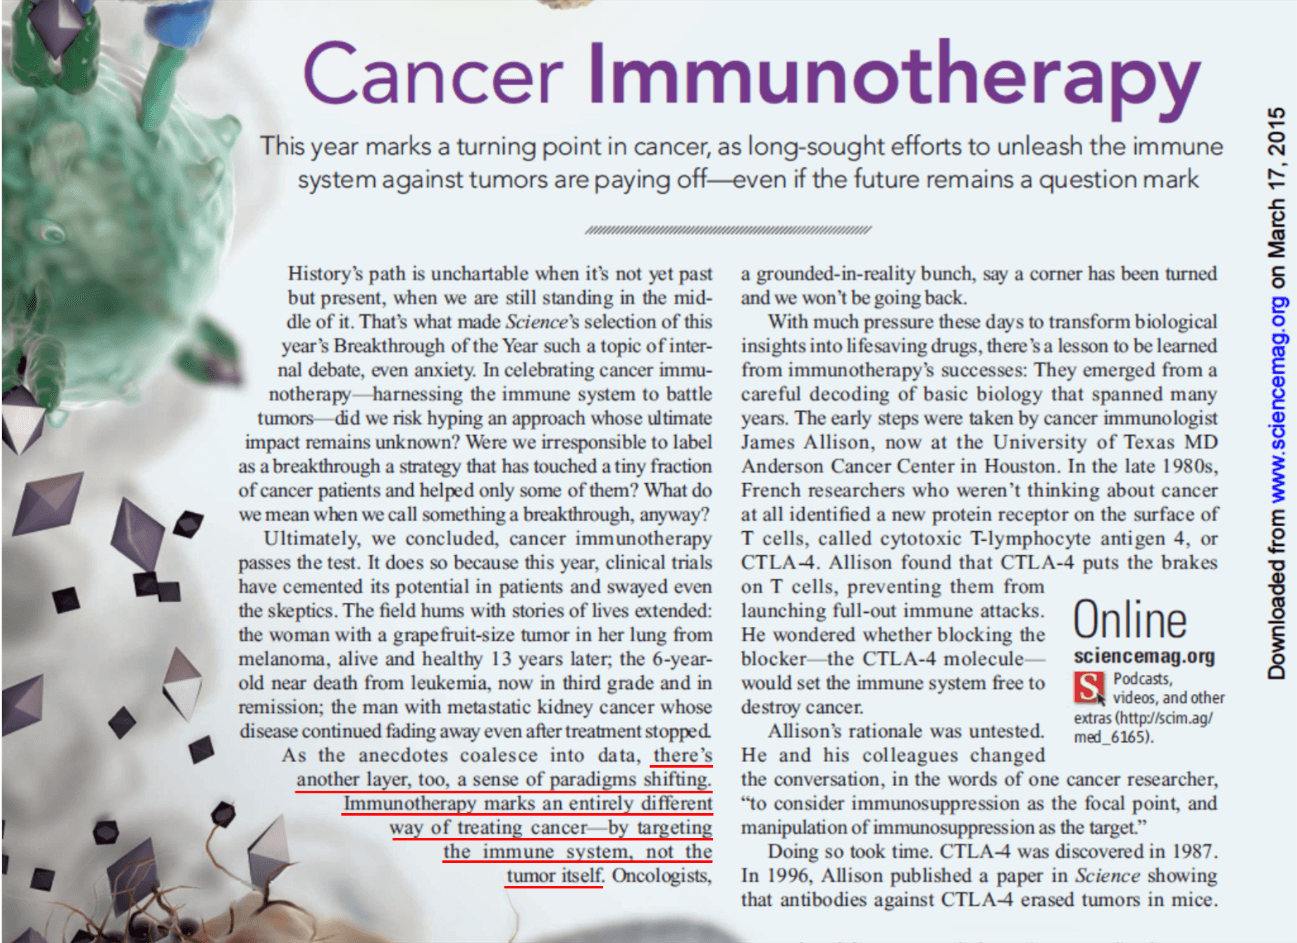 Cancer Immunotherapy